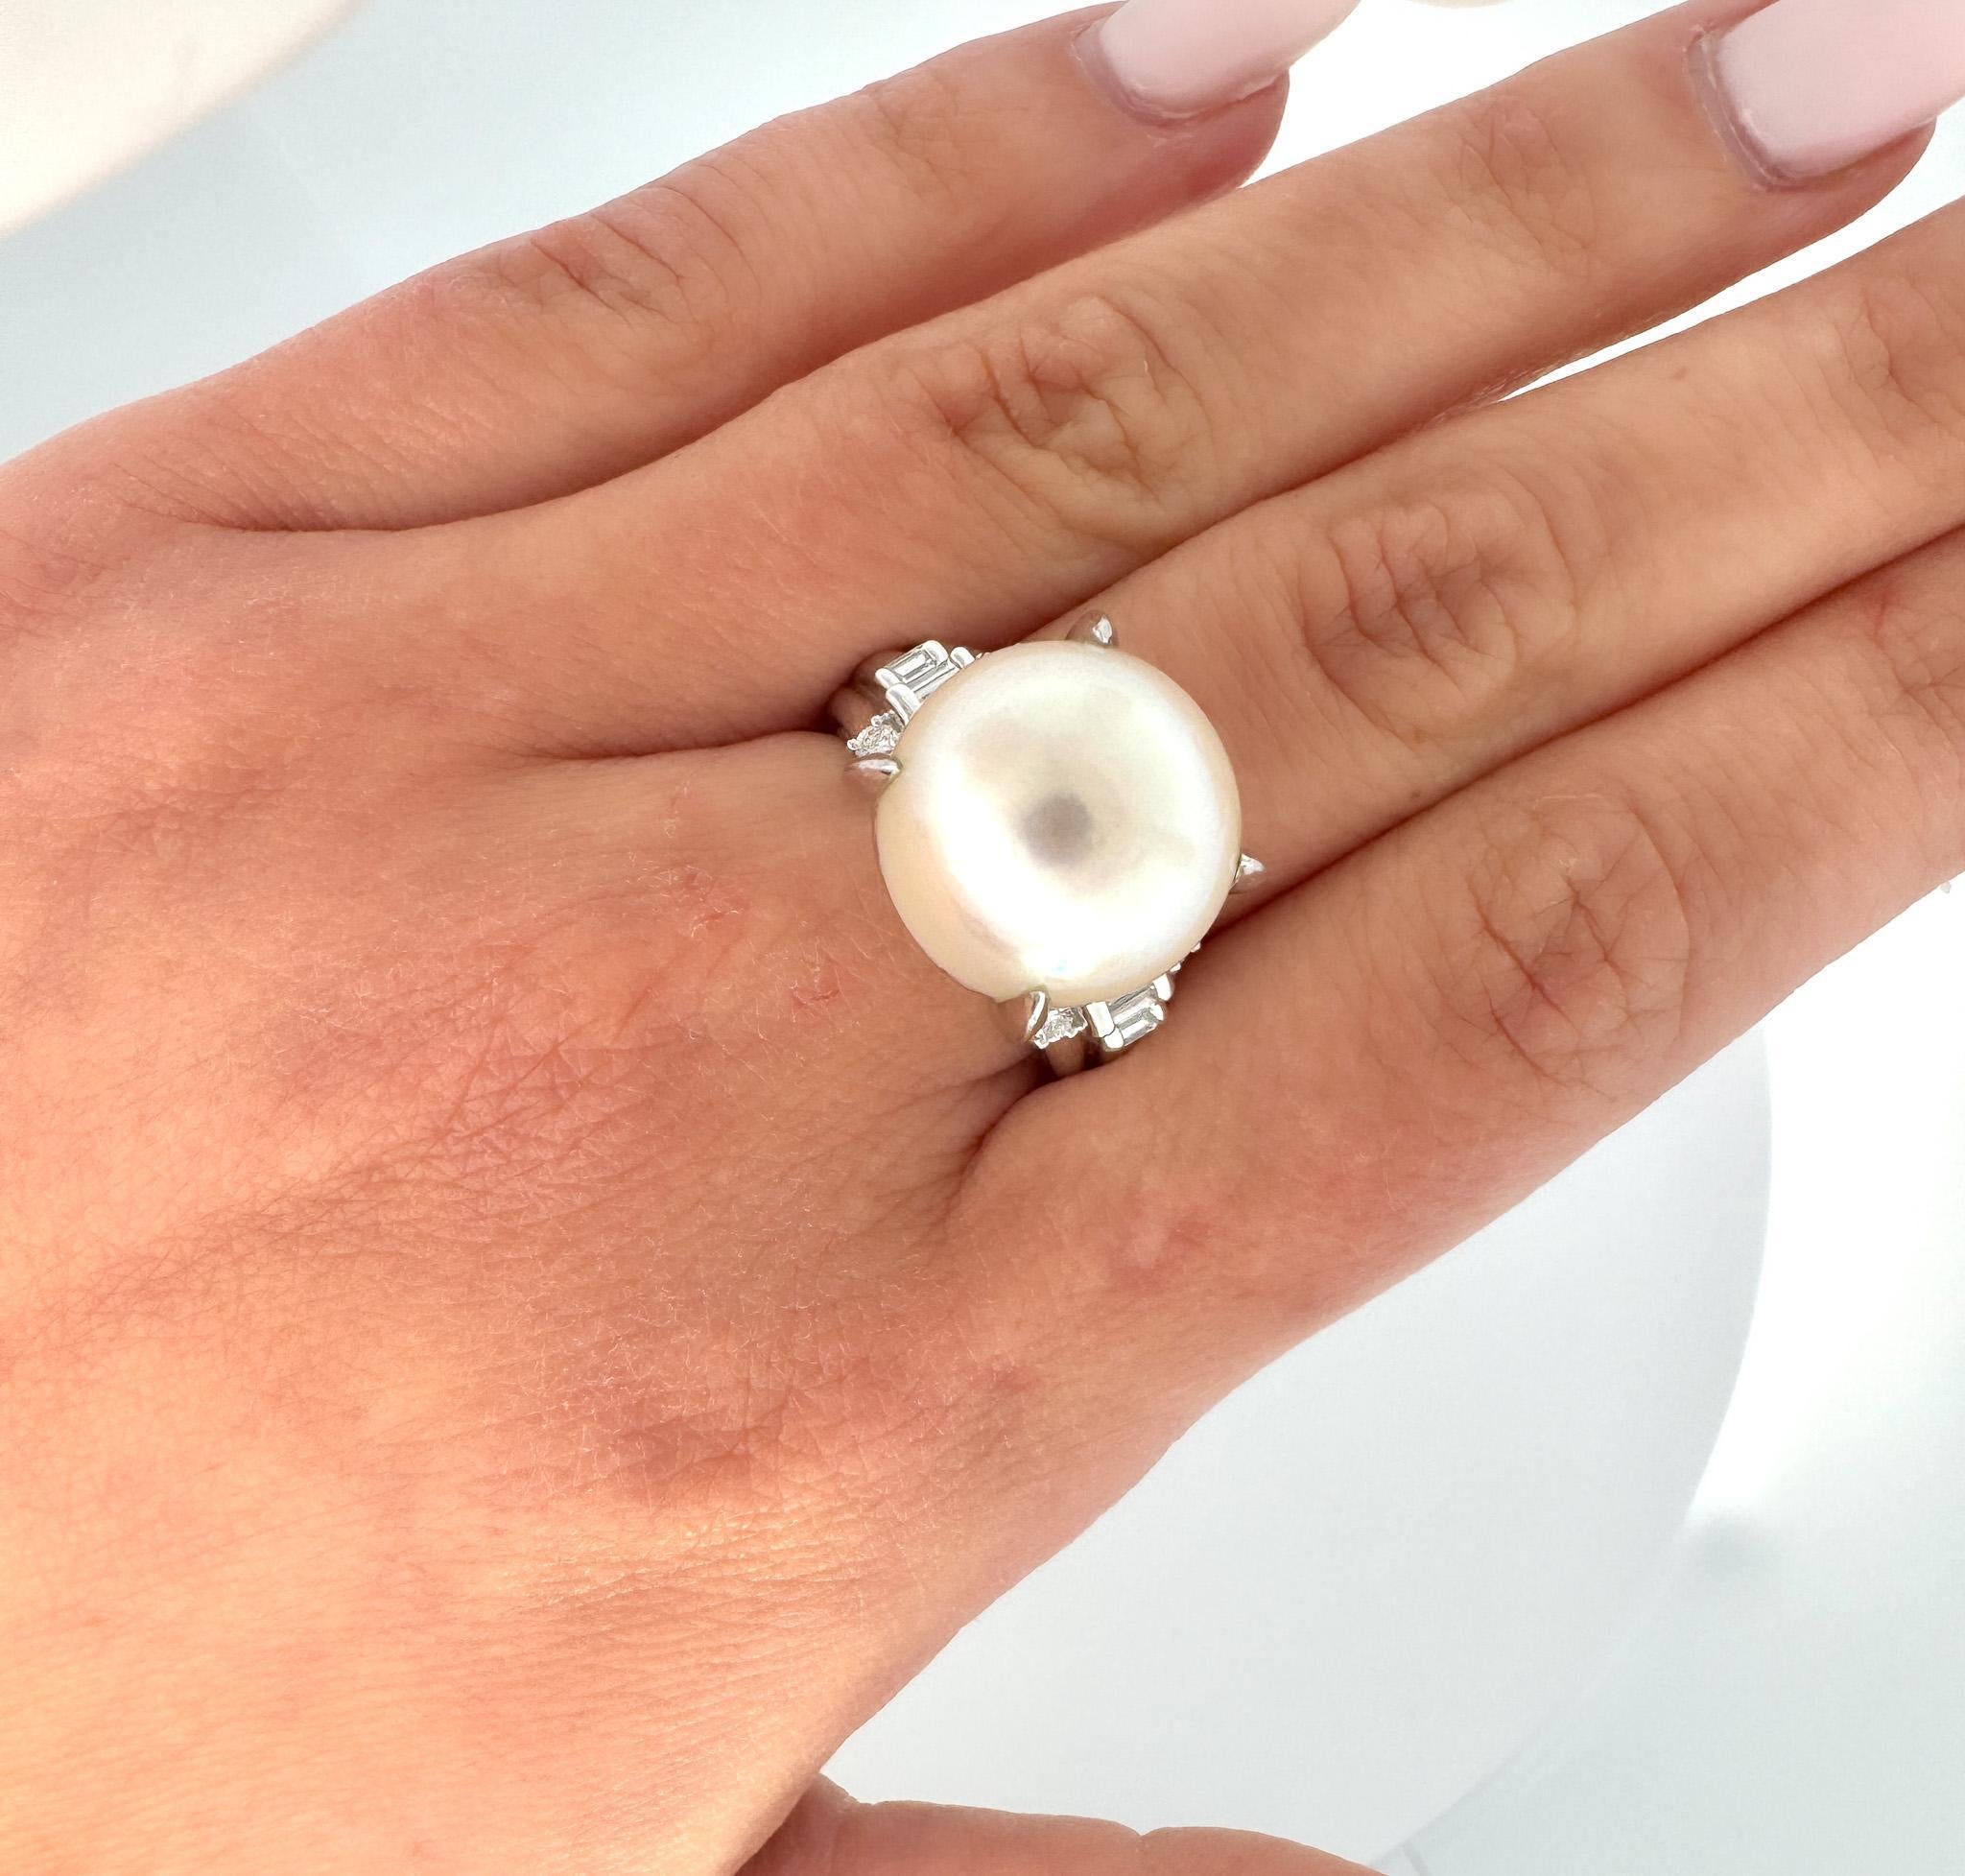 15mm South Sea Pearl and Diamond Platinum 900 Cocktail Ring. 

Featuring a lustrous 15mm south sea white pearl center stone, secured in a prong setting. The pearl is paired with 4 round cut and 4 baguette cut natural diamonds. The pearl is  secured